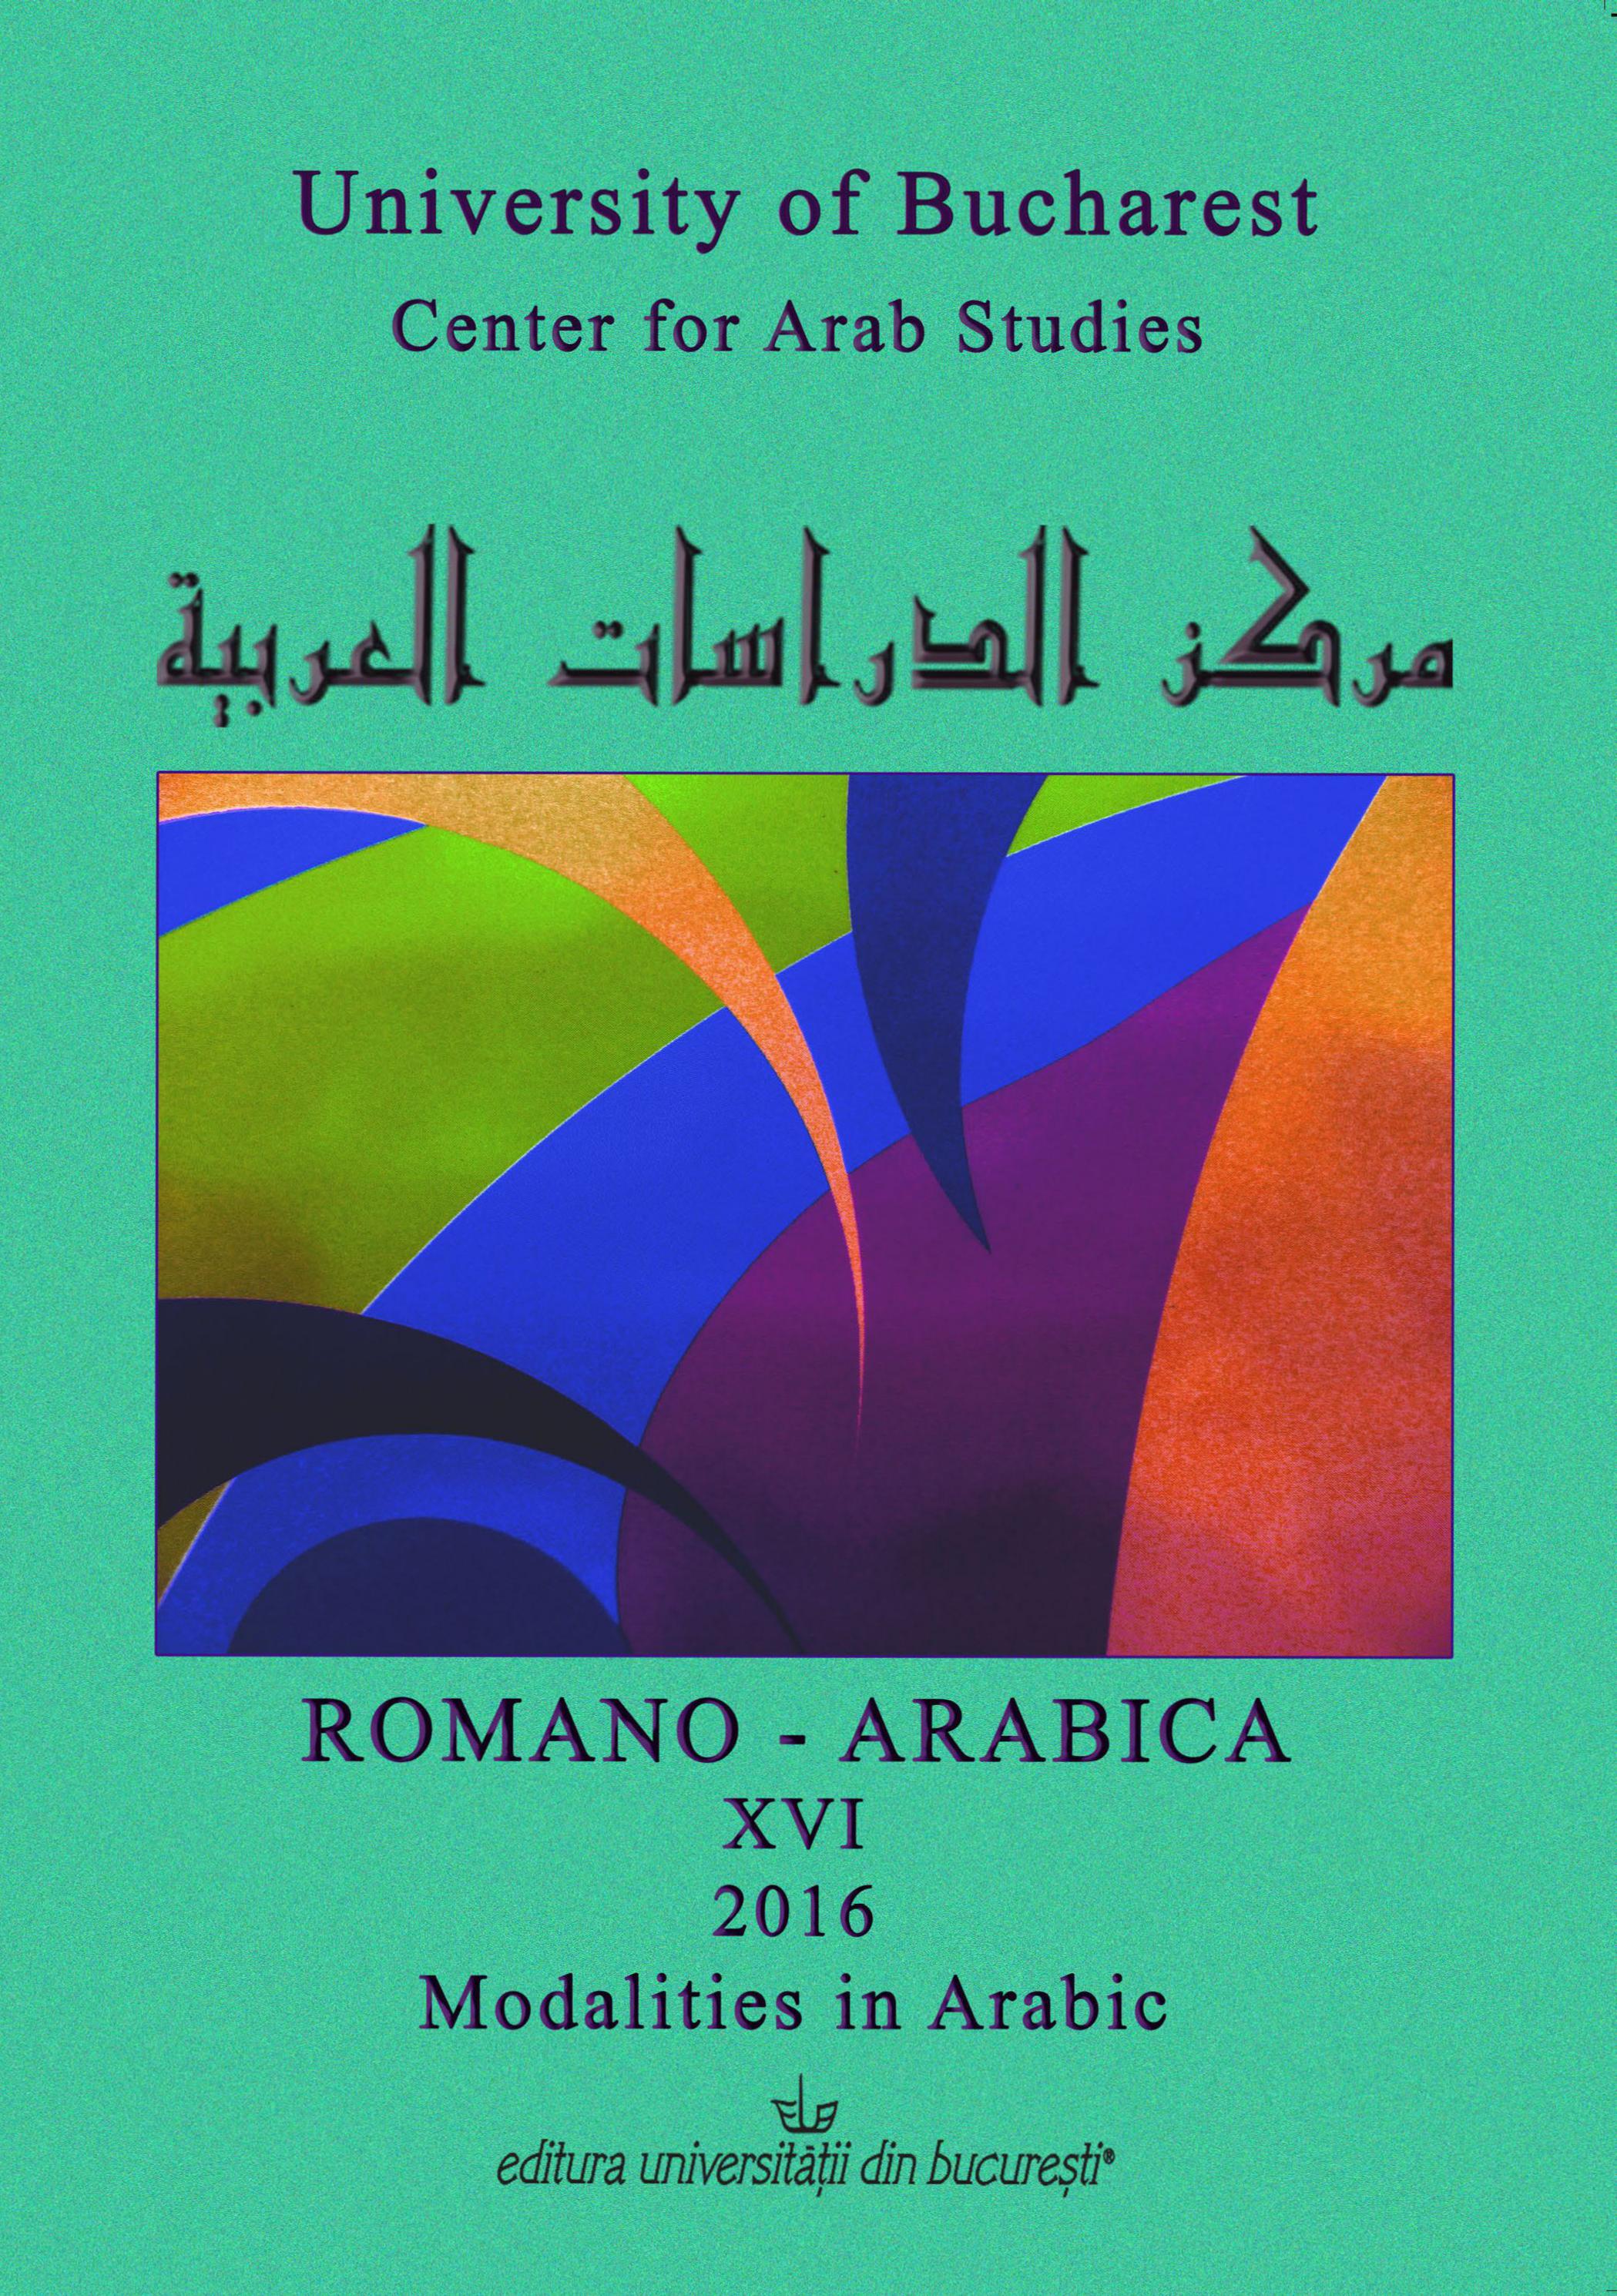 RENDITIONS OF THE ARABIC MODALITY KĀDA IN MORISCO TRANSLATIONS OF THE QUR’AN Cover Image